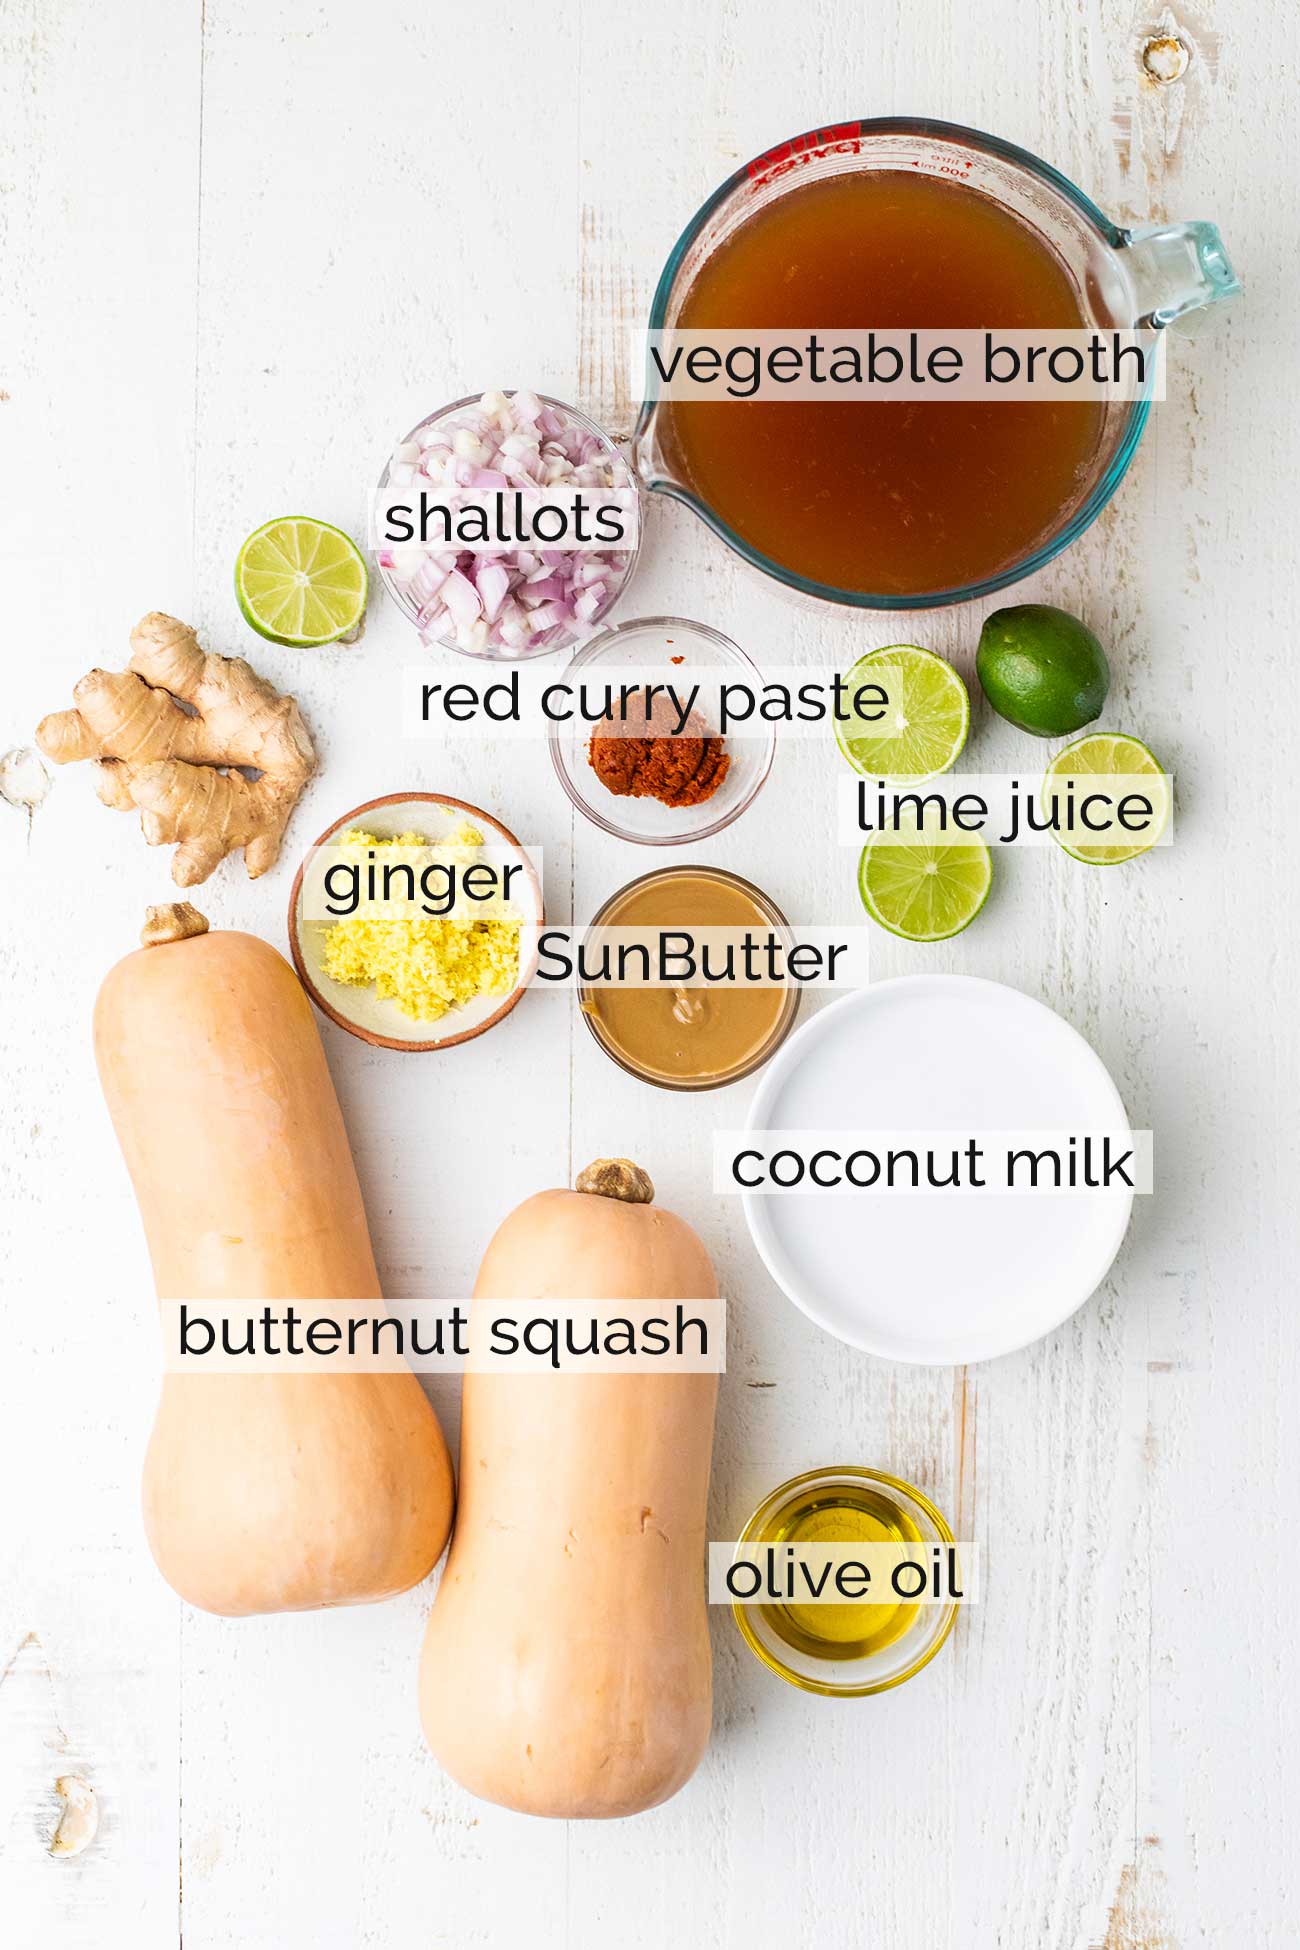 The ingredients needed for Thai Butternut Squash Soup shown with labels.